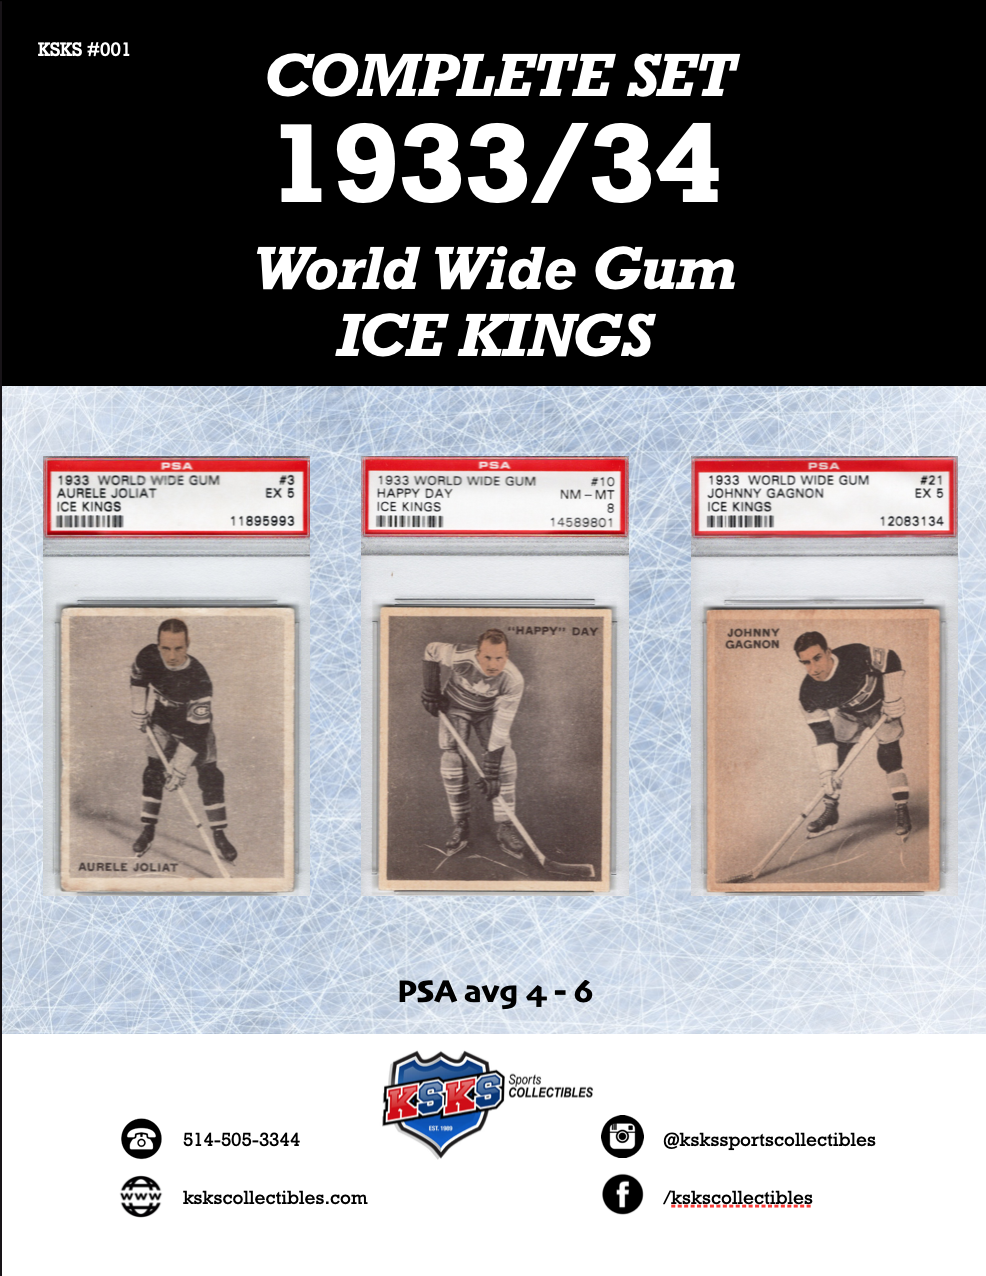 1933/34 World Wide Gum Ice Kings Complete Set